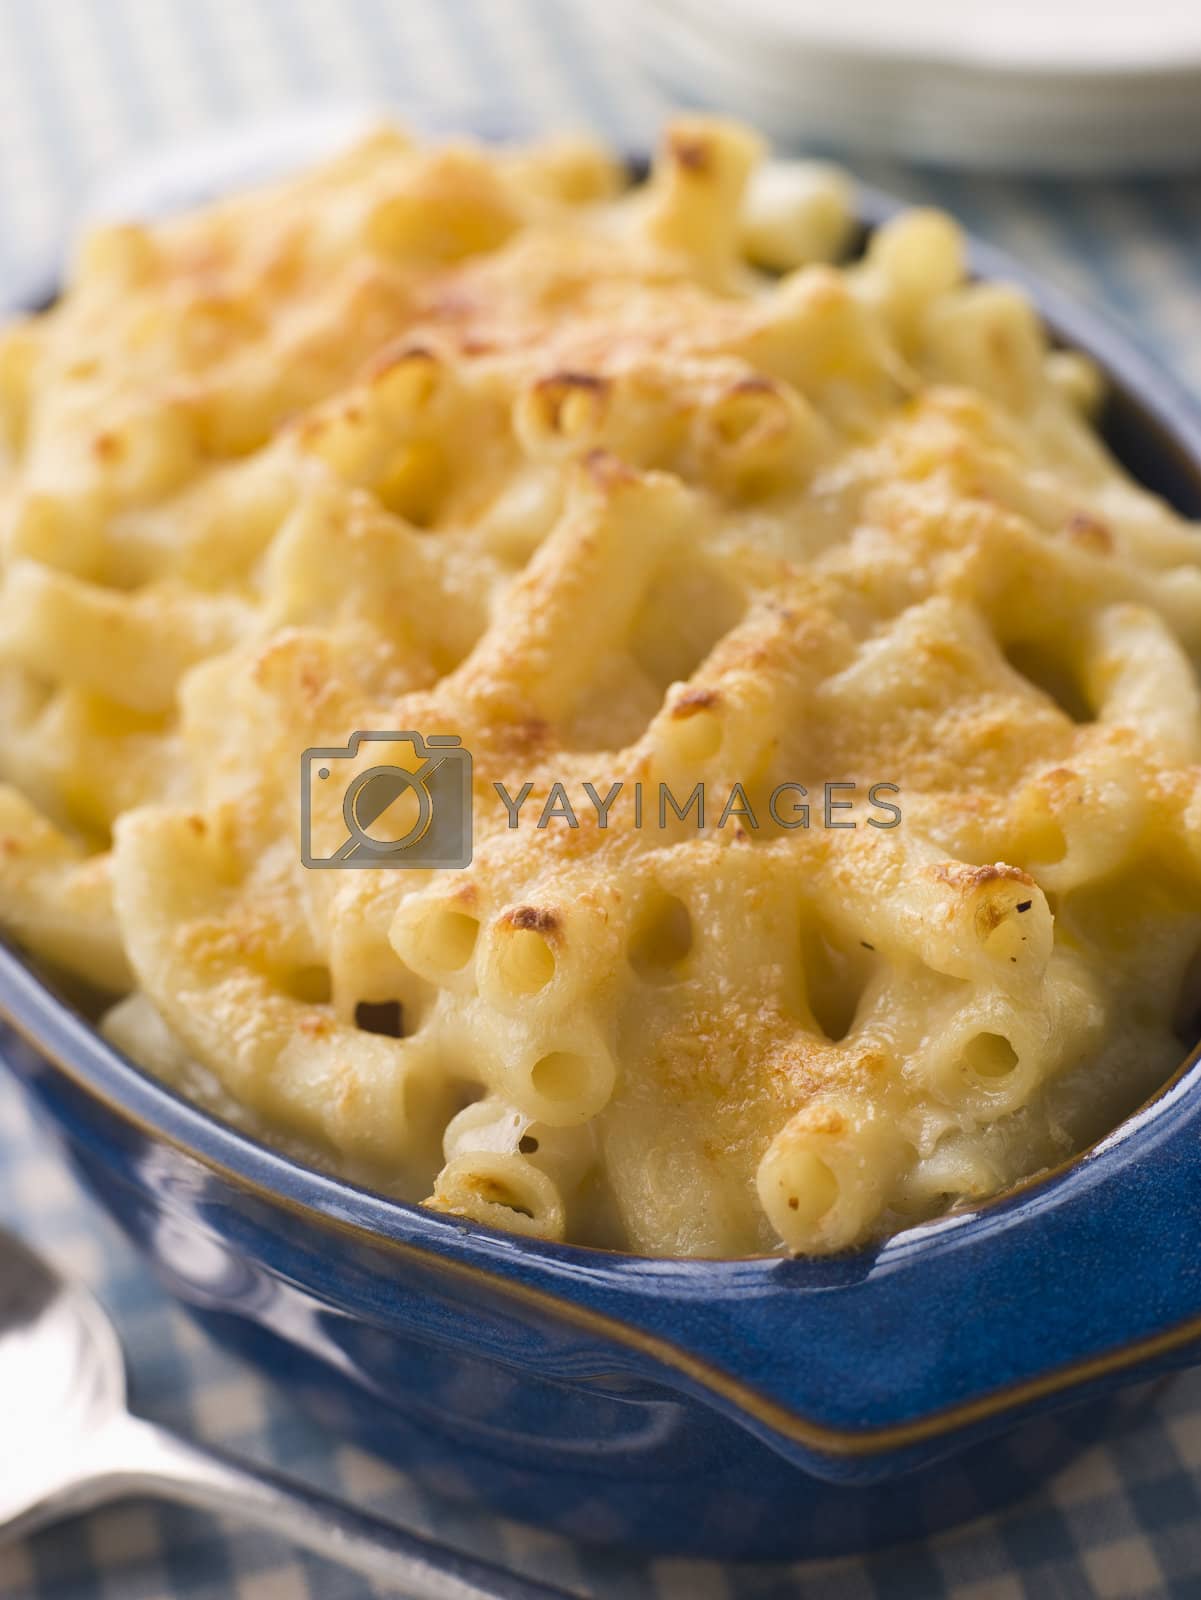 Royalty free image of Dish of Macaroni Cheese by MonkeyBusiness